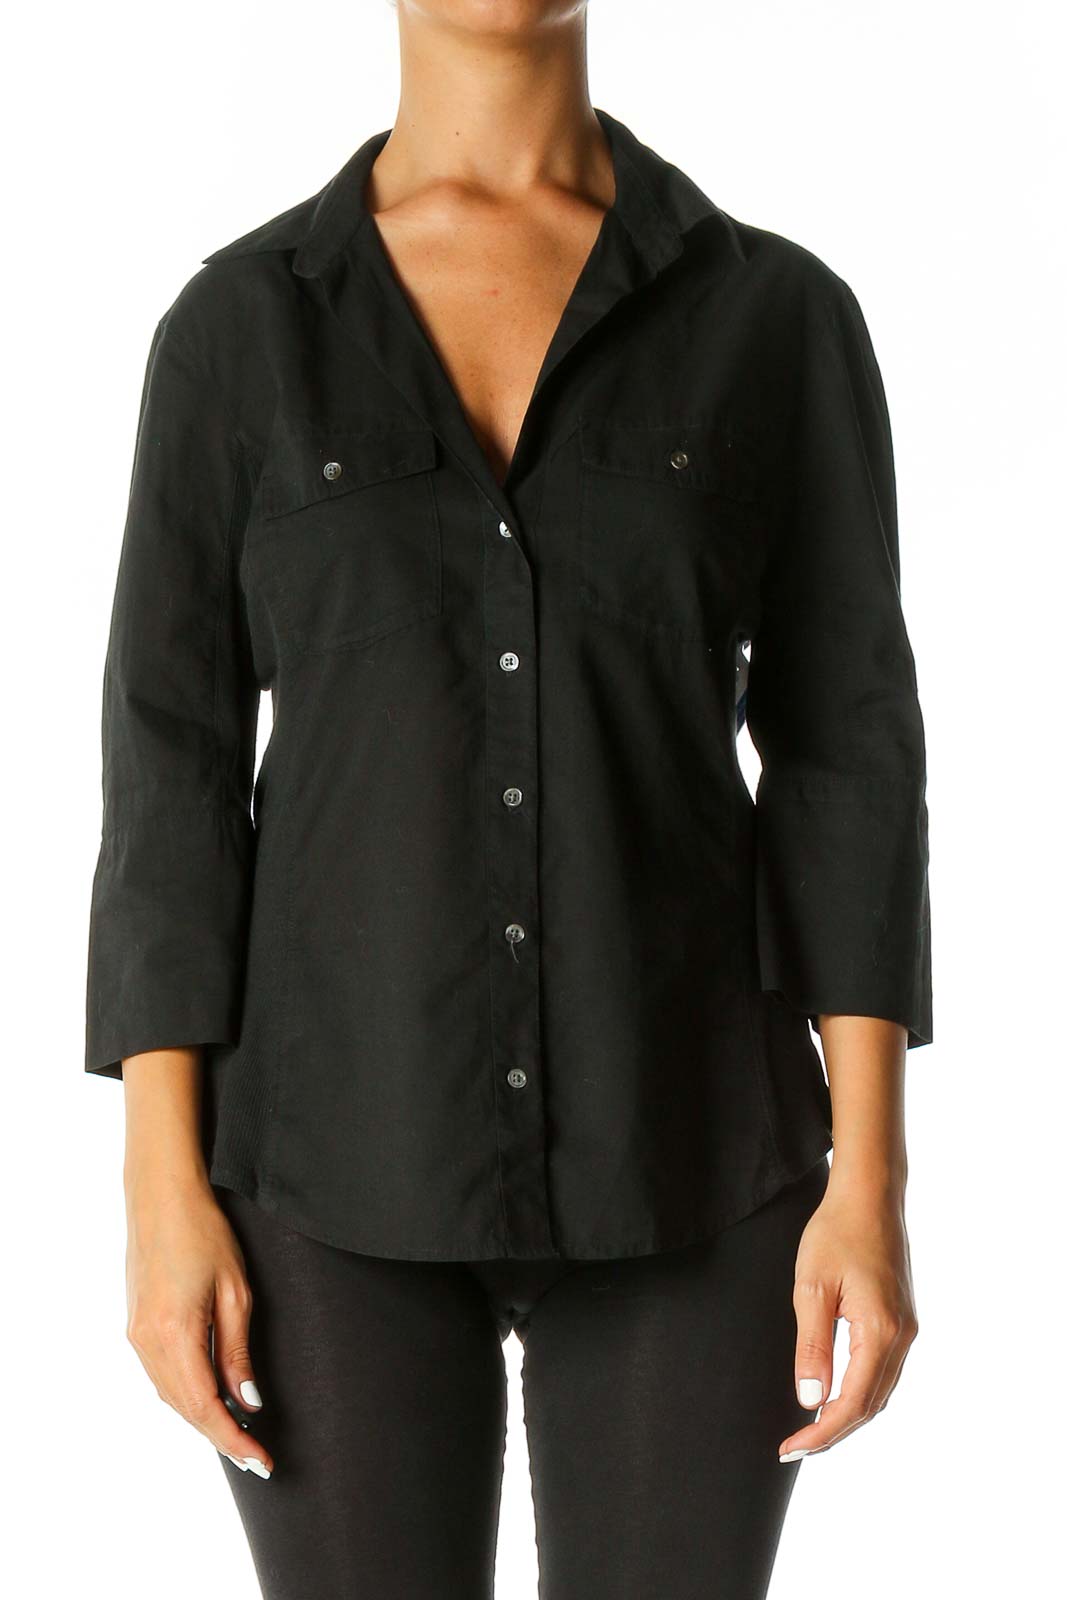 Black Solid Casual Shirt Front